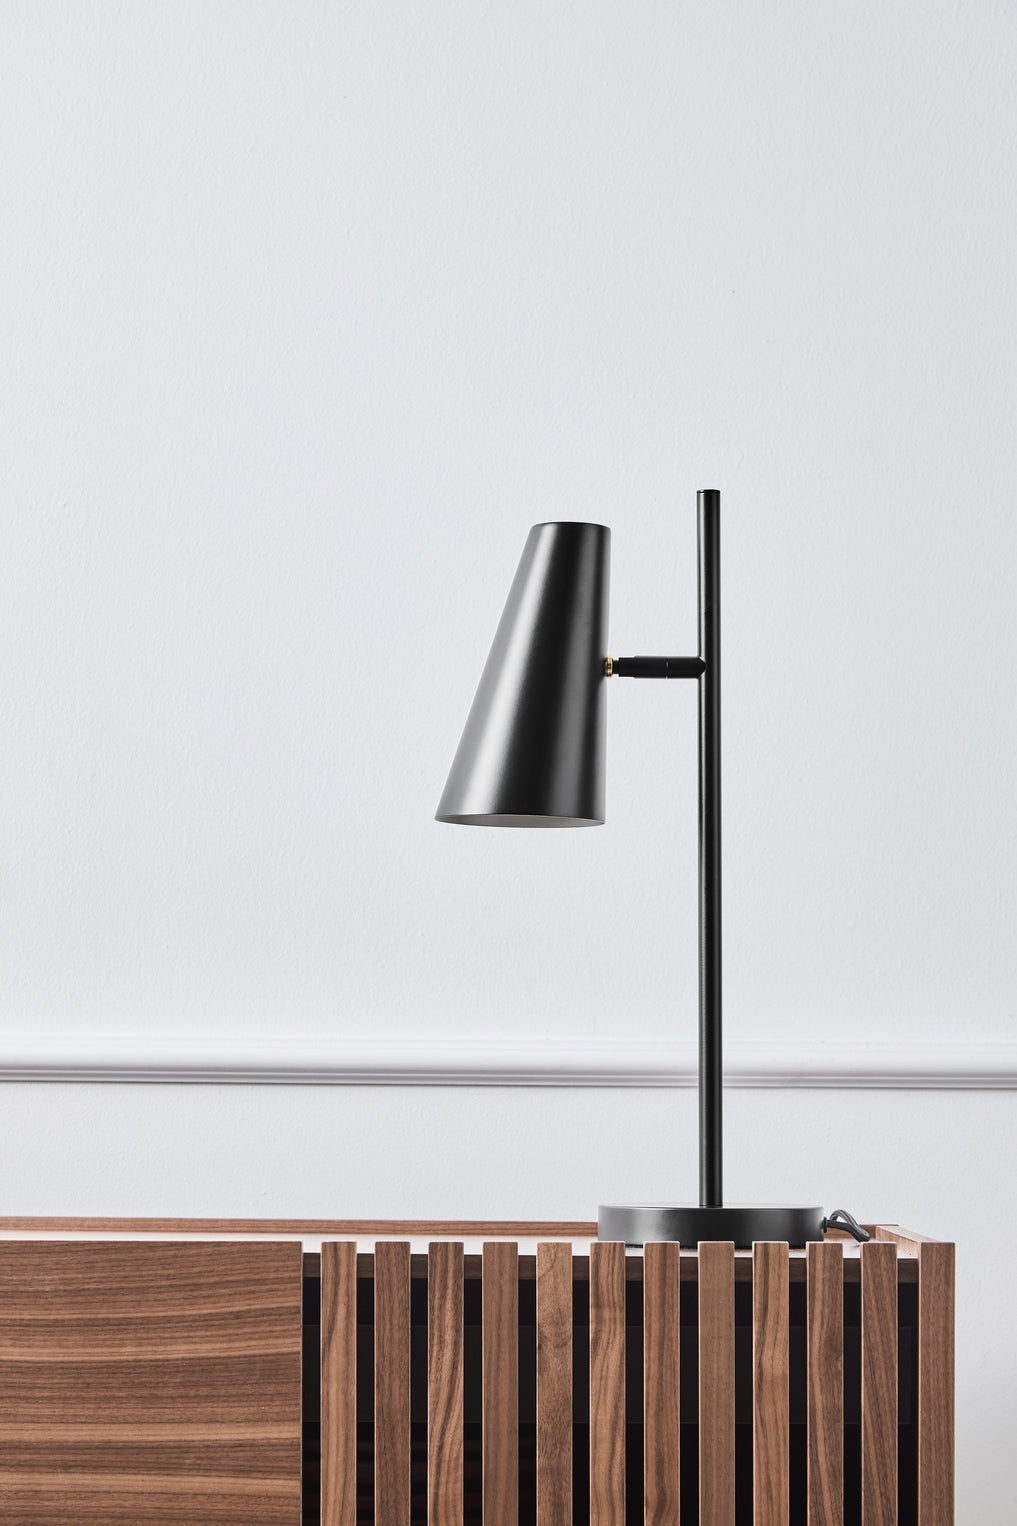 cono table lamp by woud at adorn.house